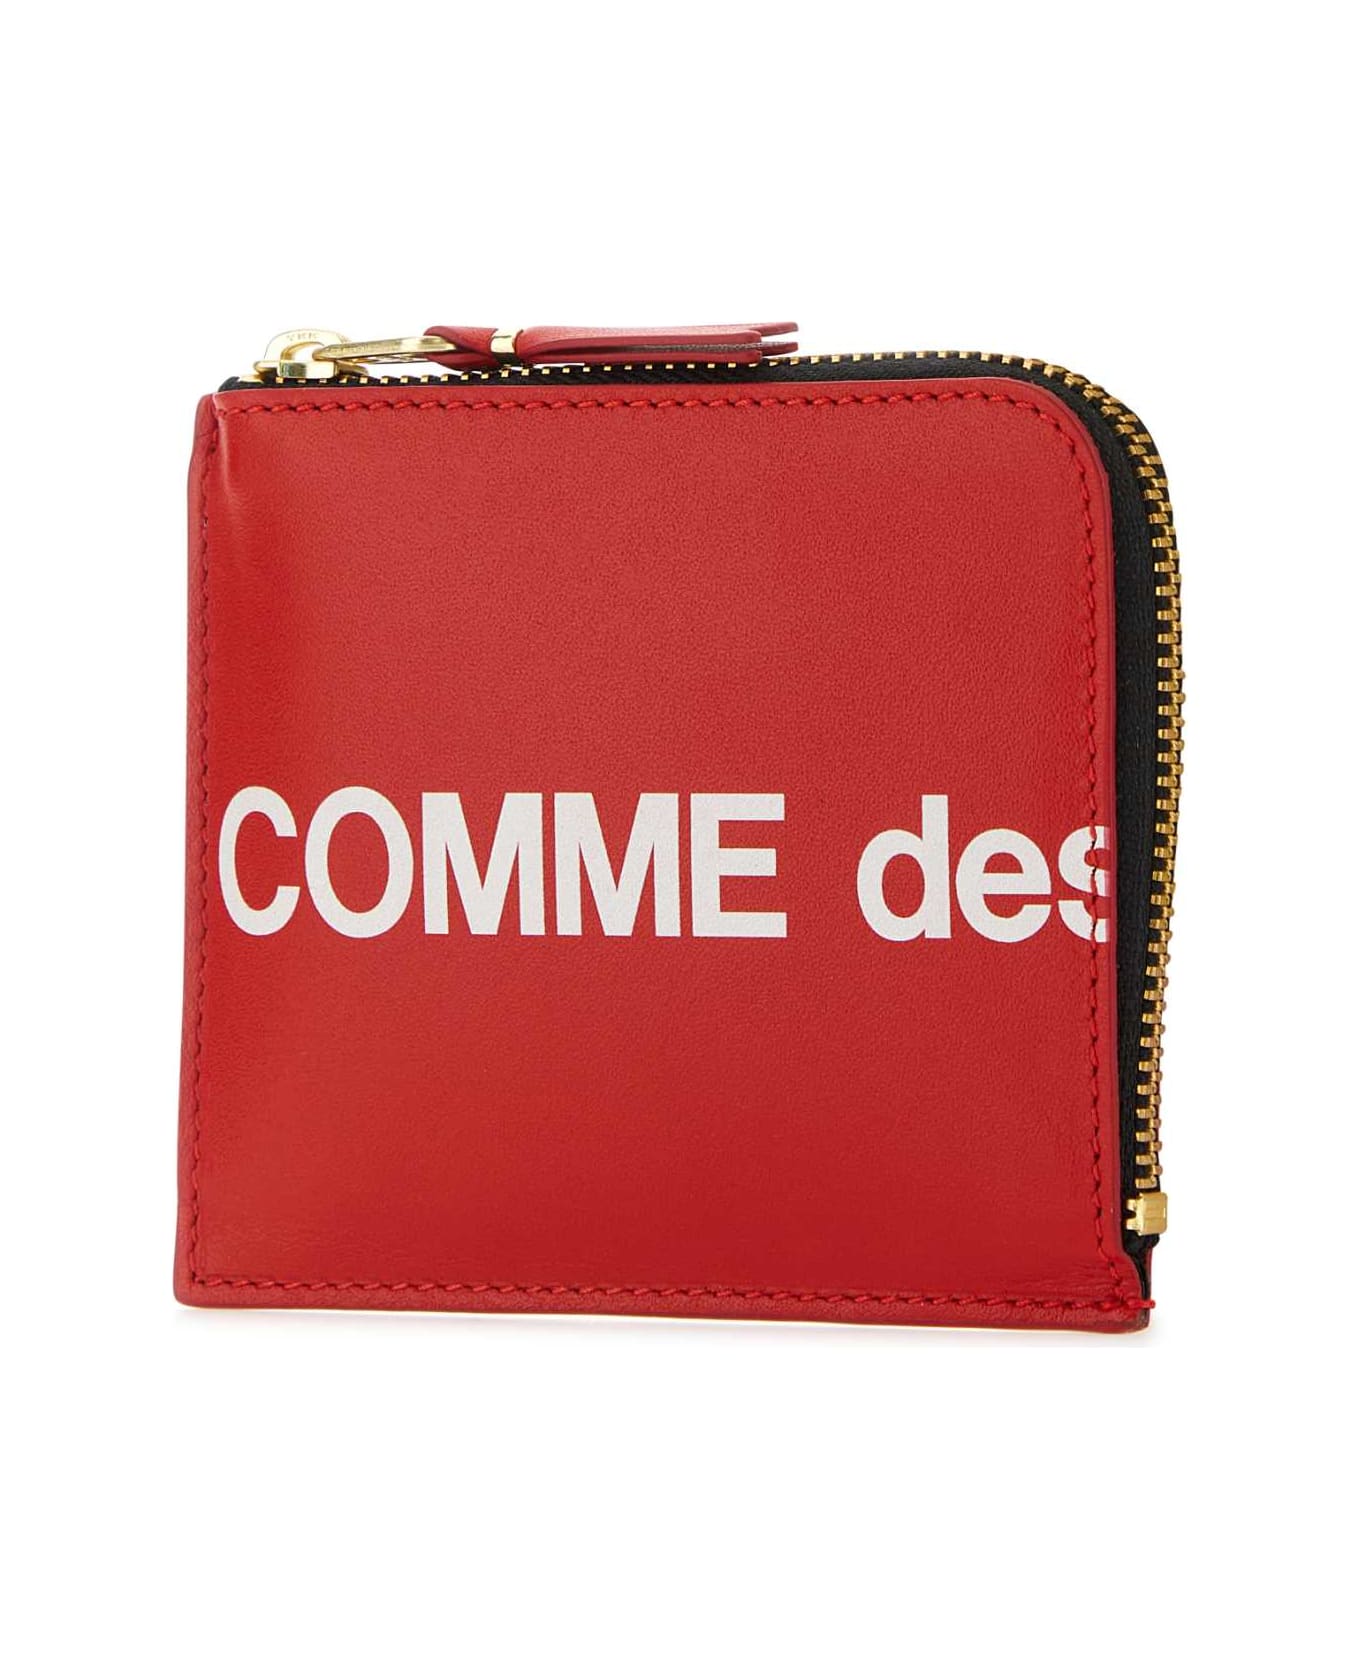 Comme des Garçons Red Leather Coin Case - RED